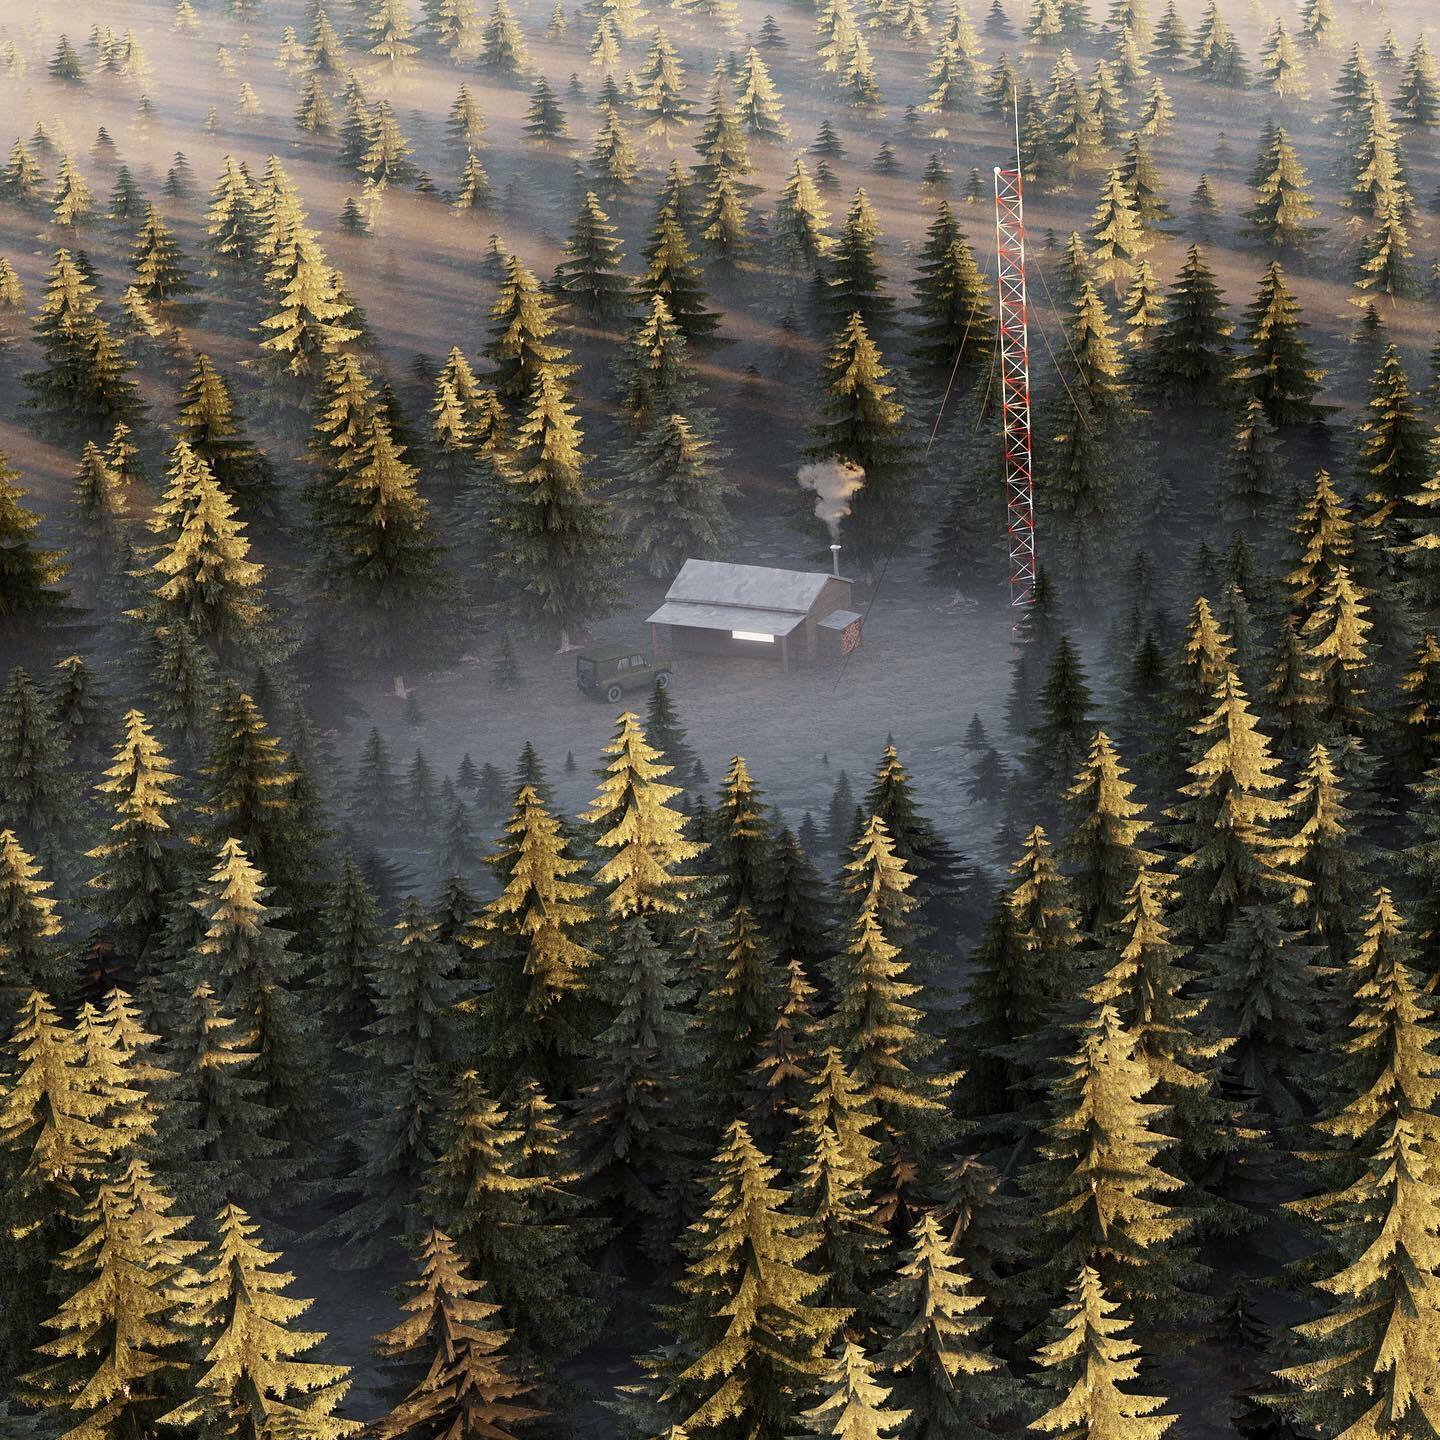 A computer render of a small cabin in a foggy forest with a radio mast next to it with sunlight shining through the trees